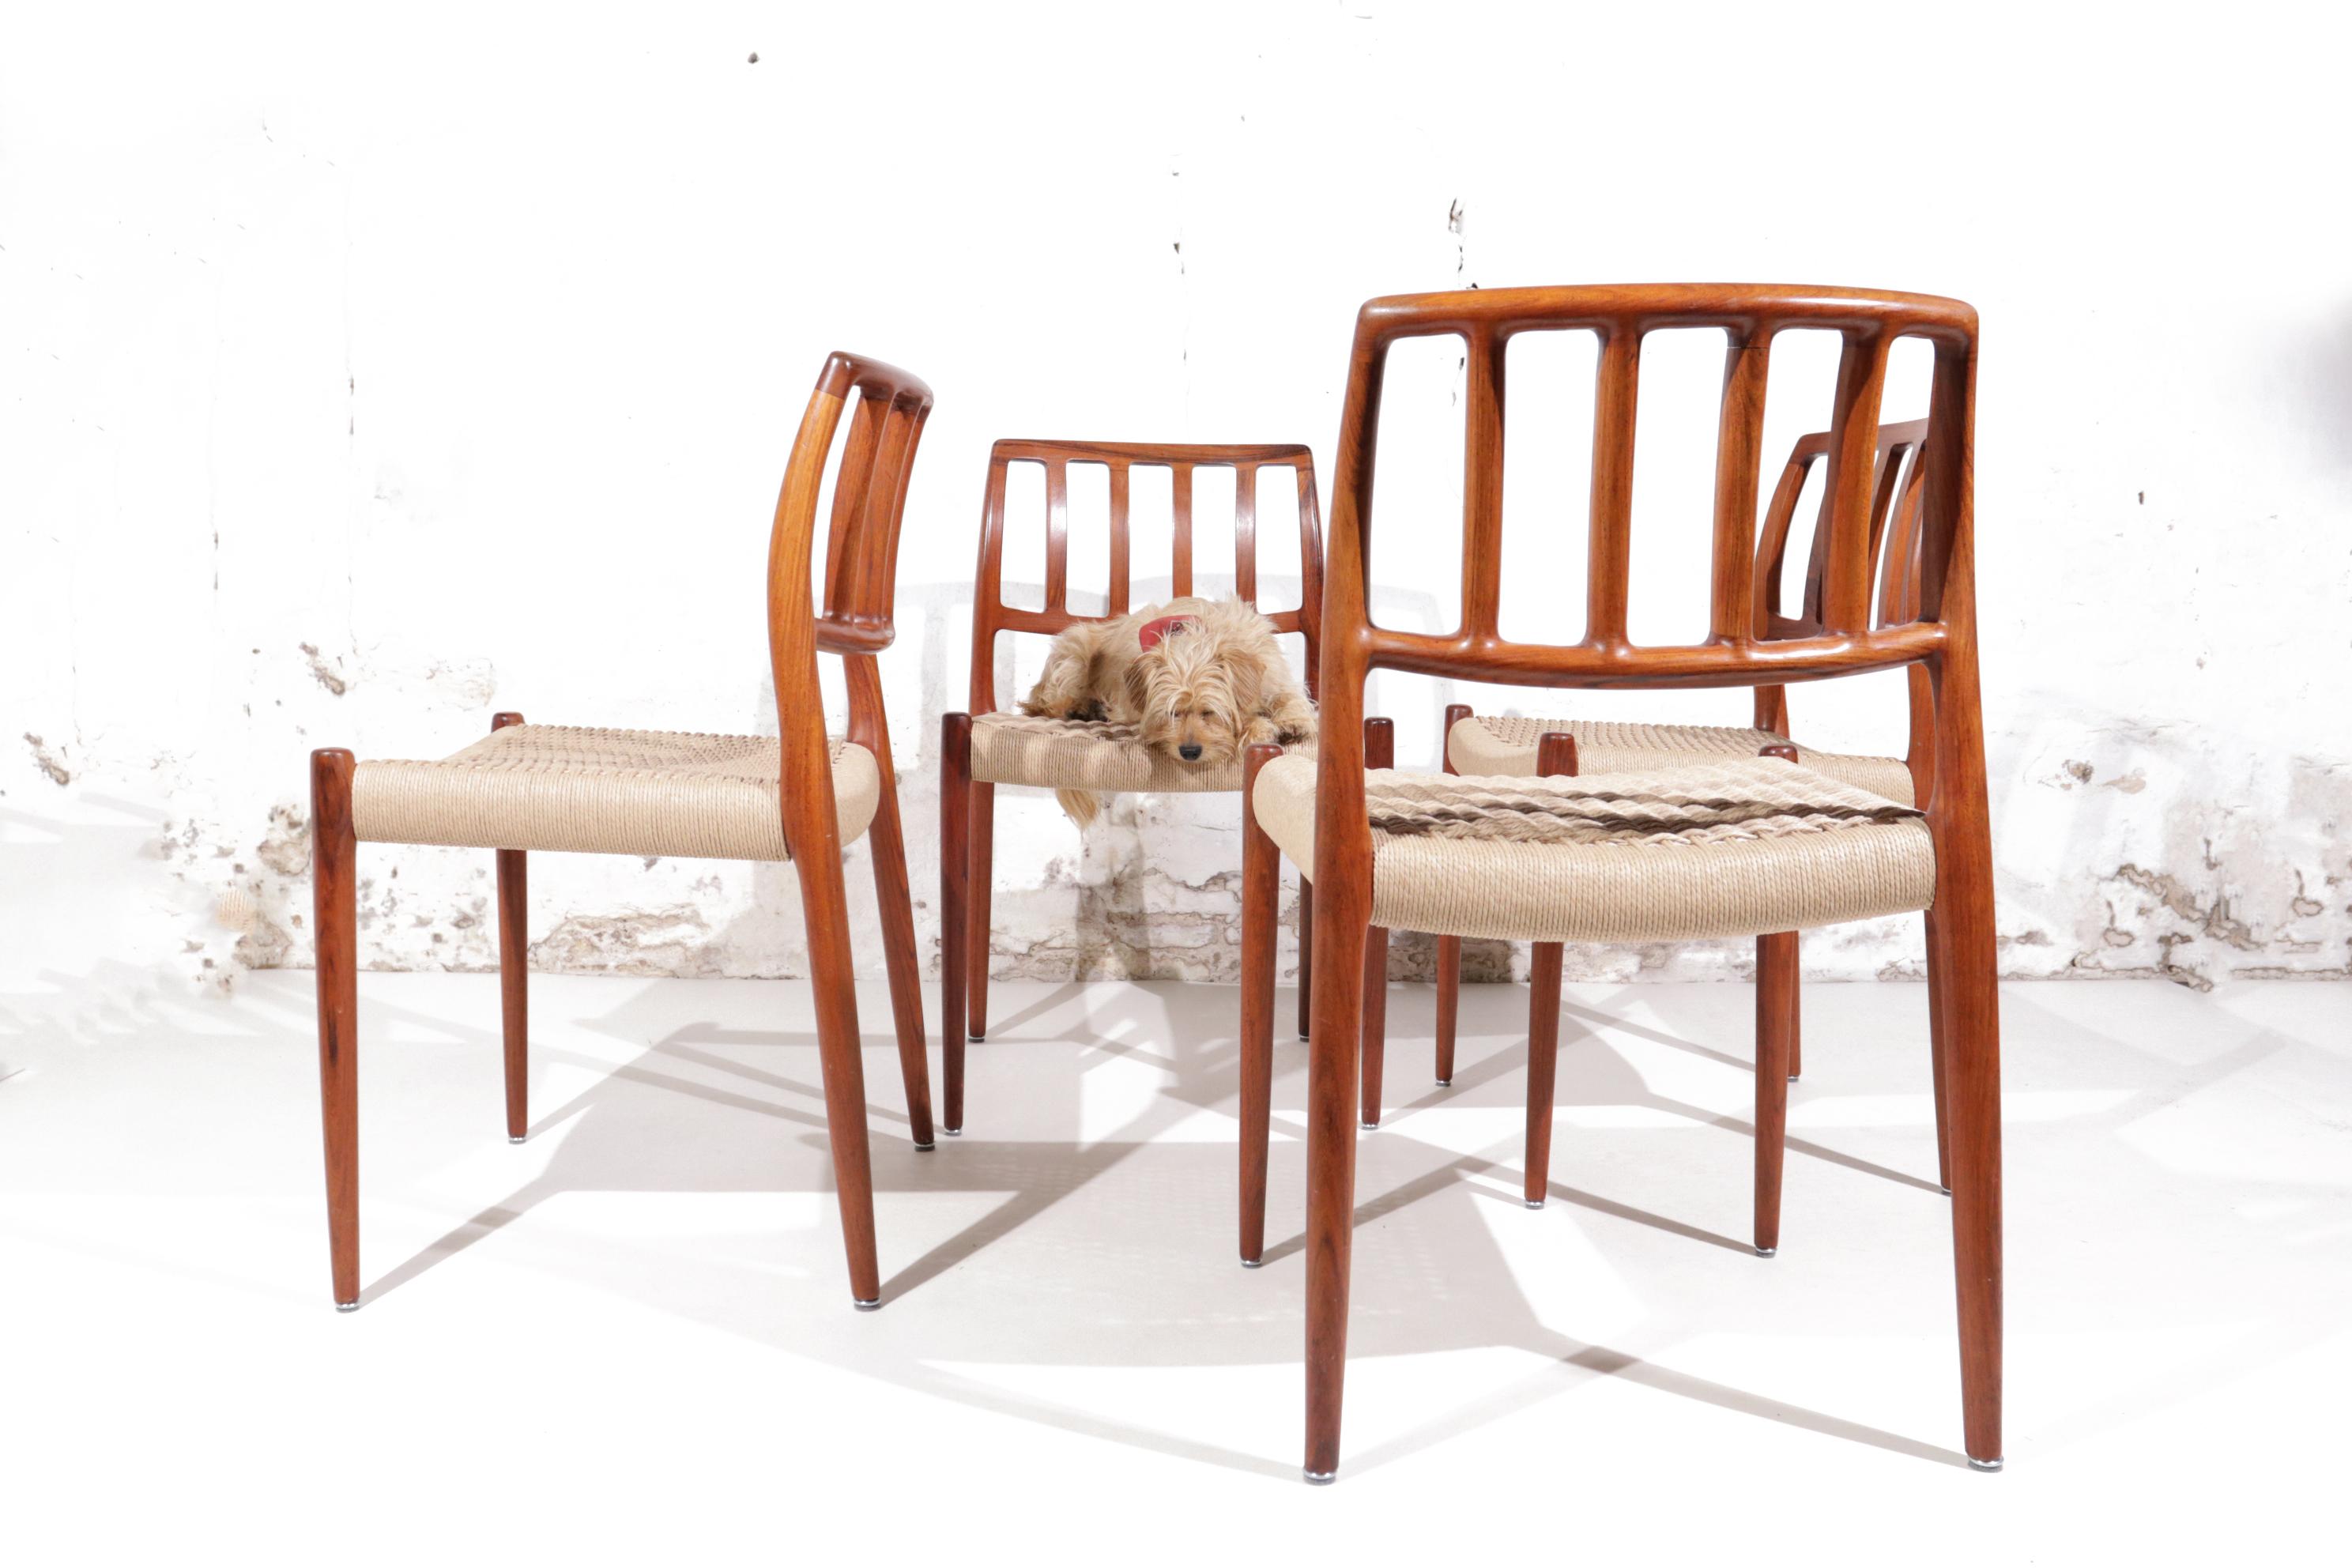 Elegant dining room chairs designed by Niels Otto Moller for J.L. Moller Mobelfabrik in Denmark.
The frame is made of the most beautiful and rare wood type; Rosewood and they are in a very good condition, the paper cord has been completely